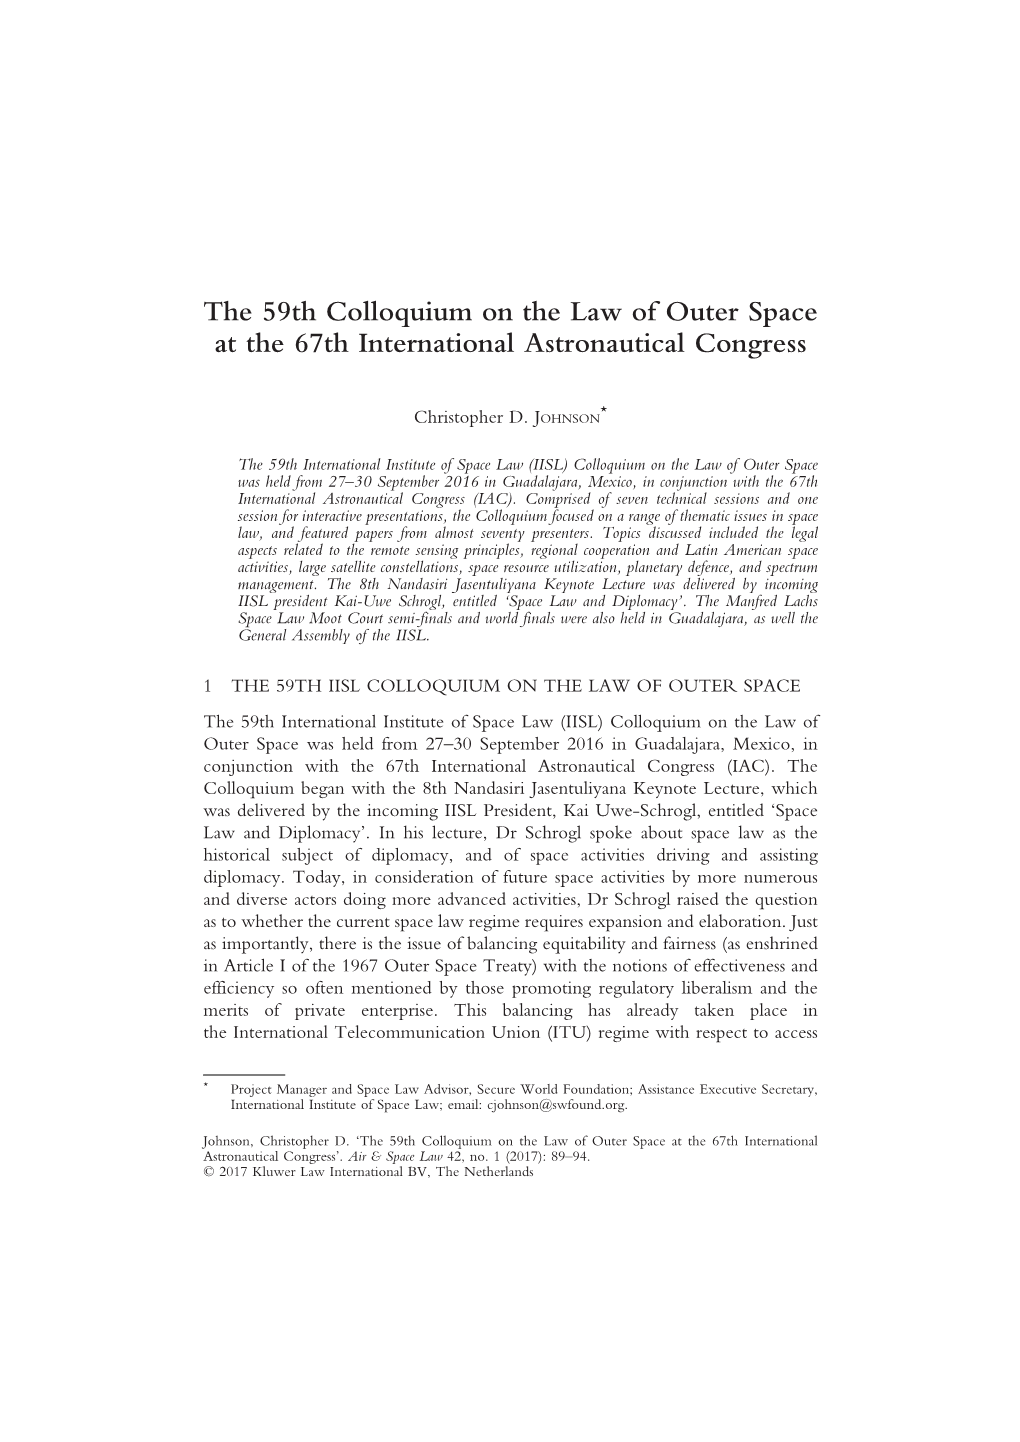 The 59Th Colloquium on the Law of Outer Space at the 67Th International Astronautical Congress